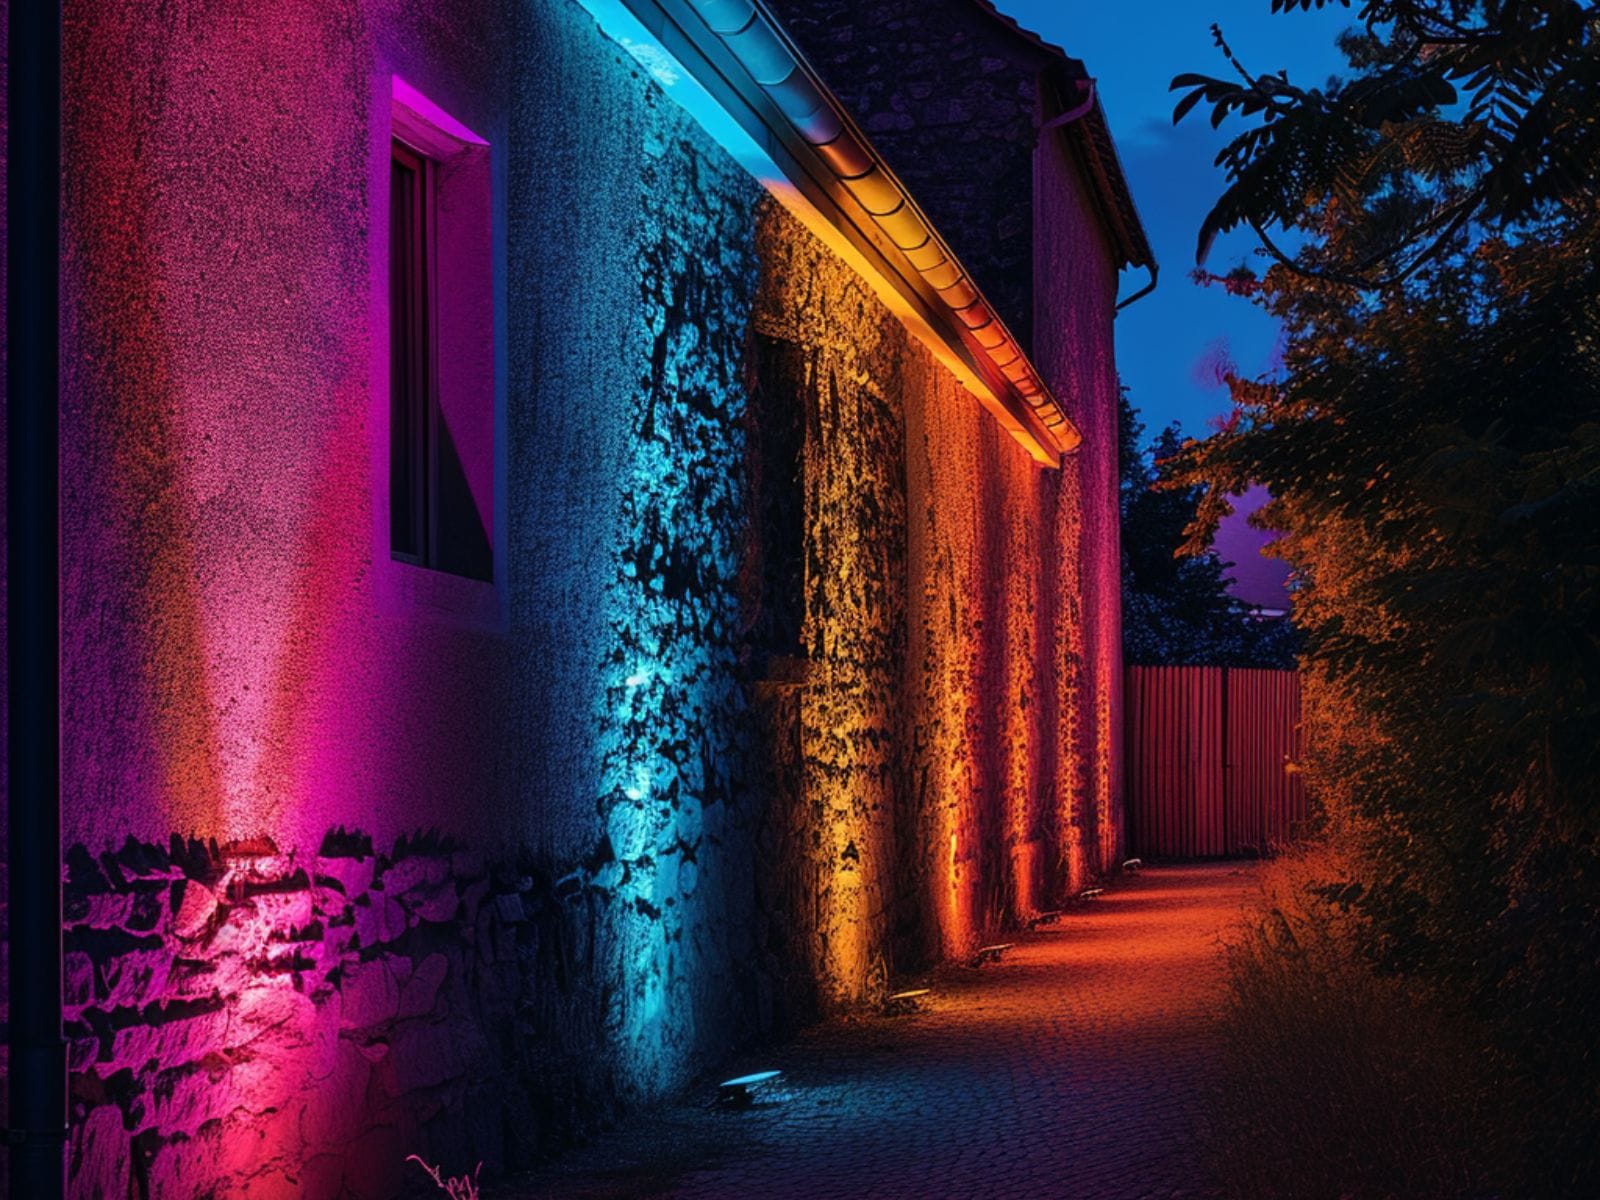 A facade wall decorated with colorful LED flood lights